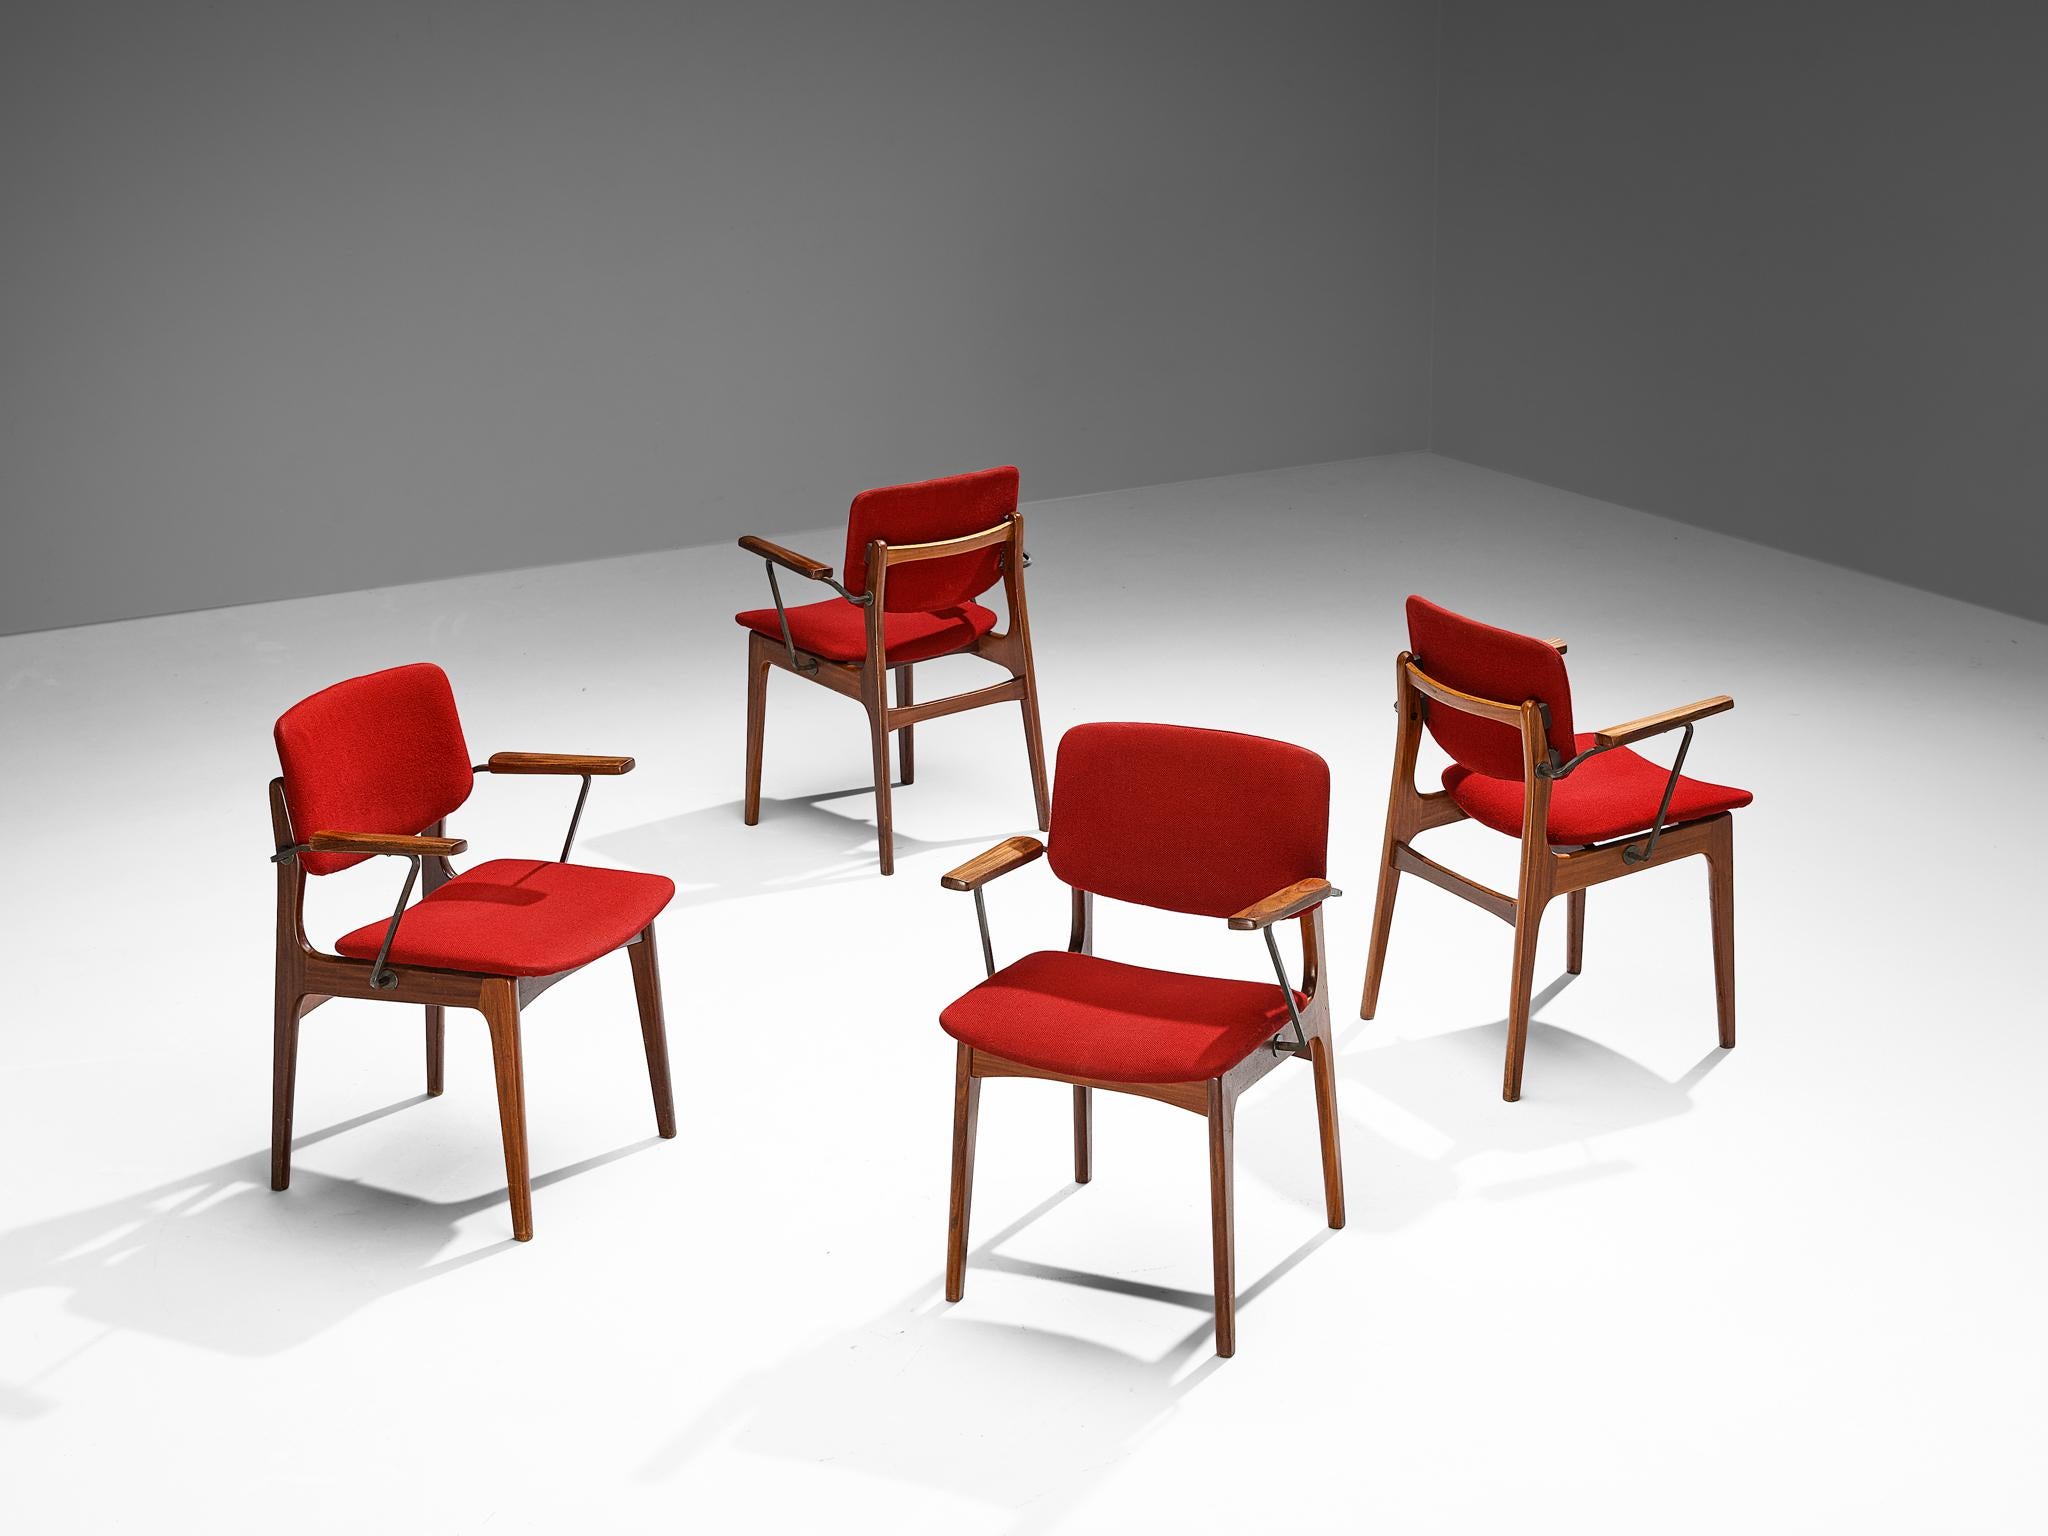 Set of four armchairs, fabric, iron, teak, The Netherlands, 1960s.

These Dutch dining chairs are well-proportioned, featuring a teak frame with angular lines and round edges. The armrests are composed of a wooden slat that are connected to an iron